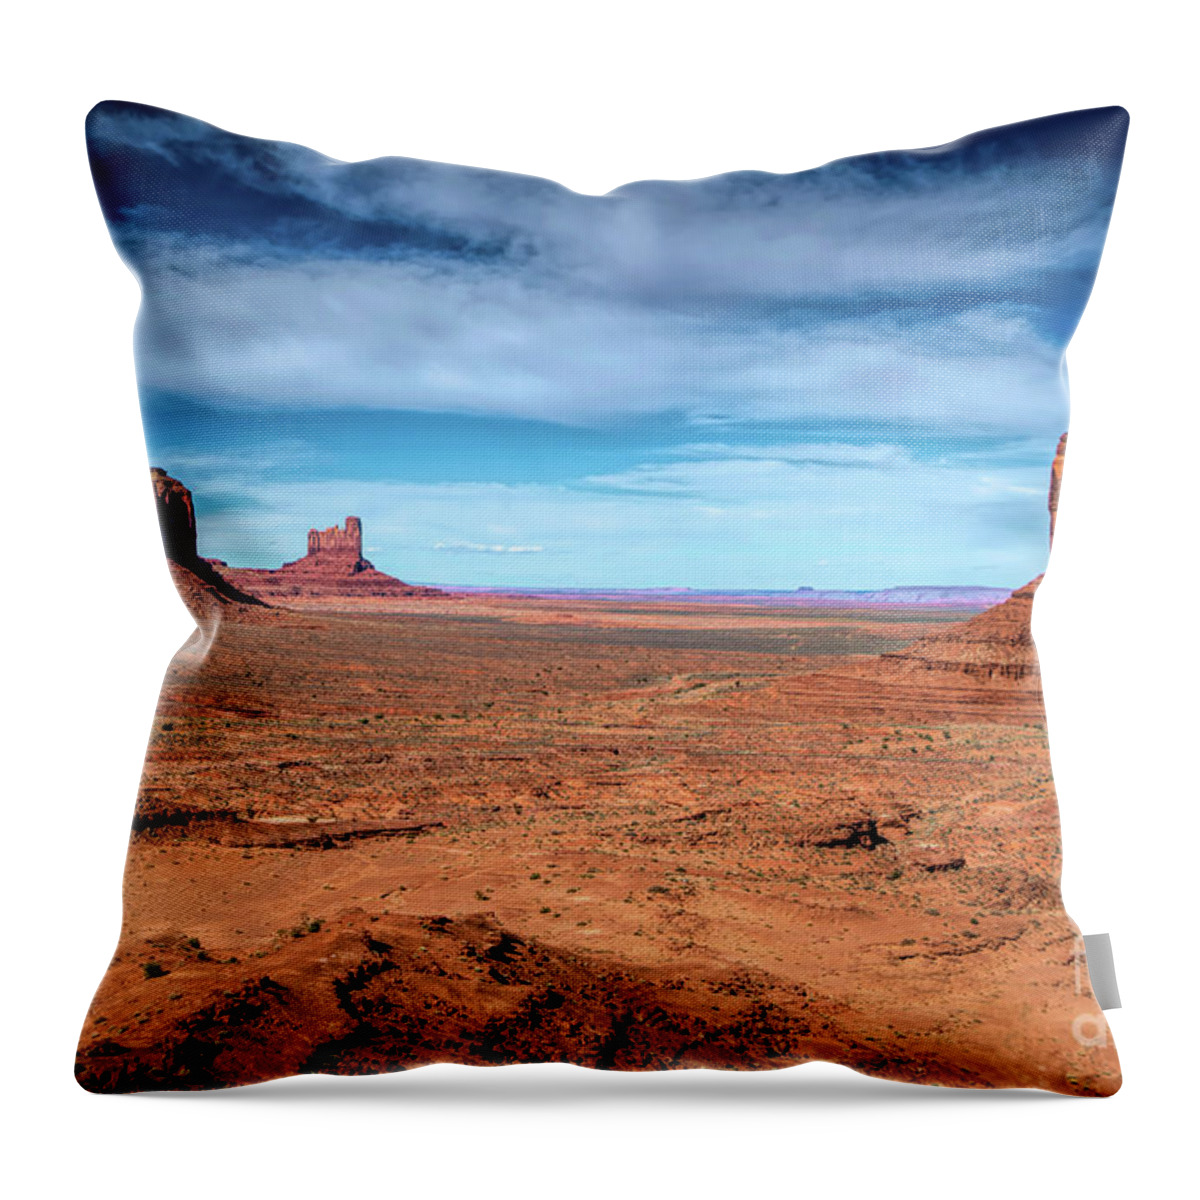 Utah Throw Pillow featuring the photograph Reaching by Ed Taylor